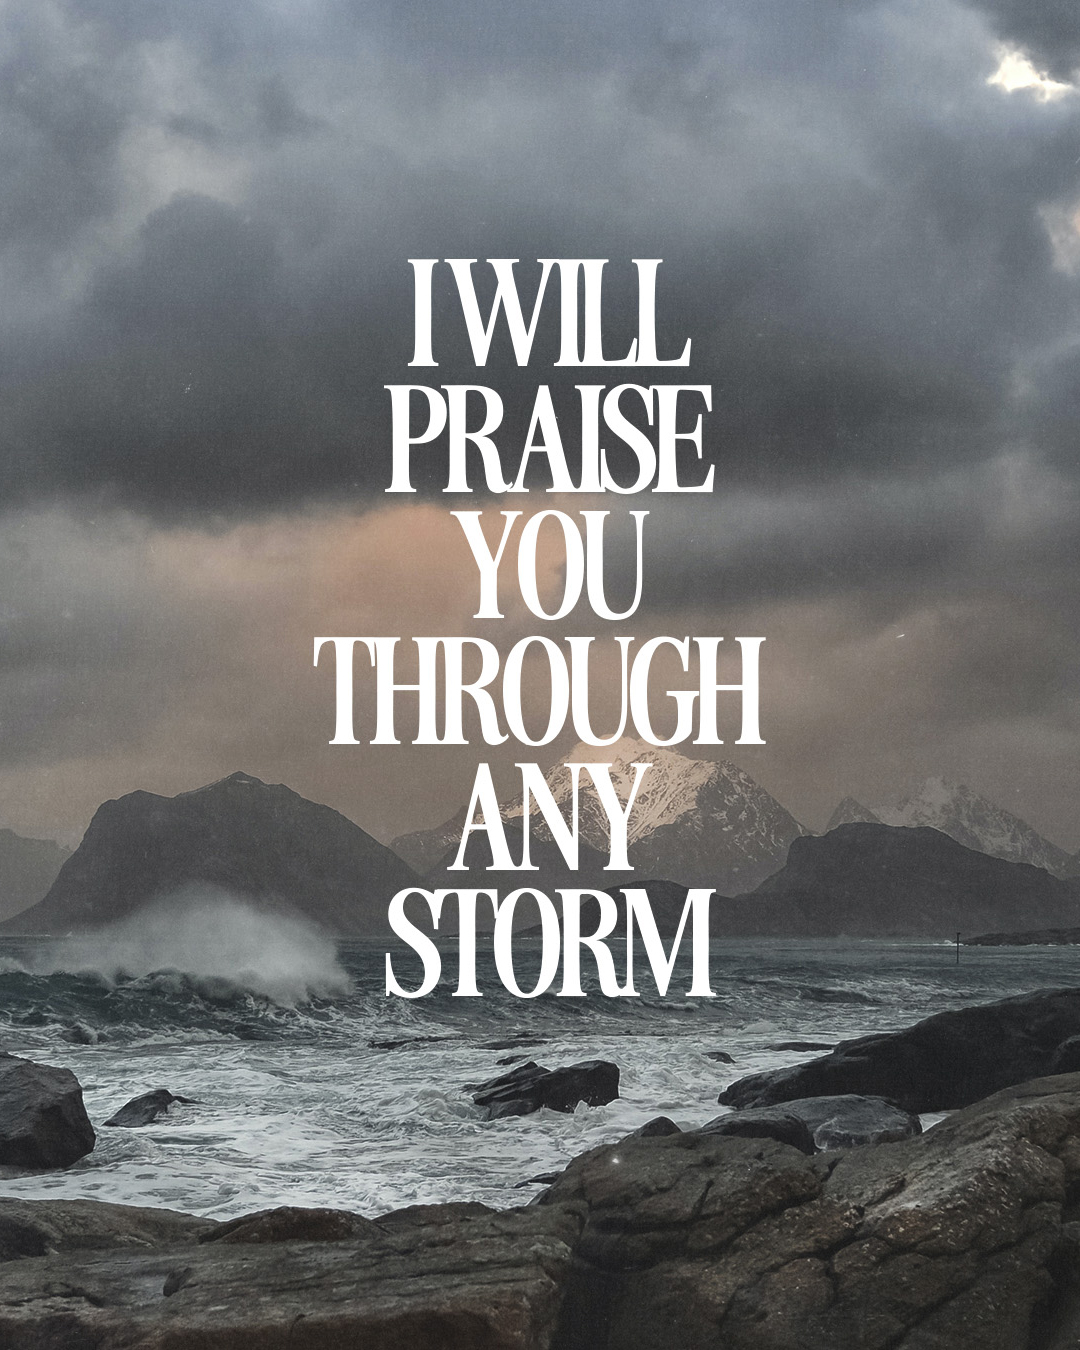 I will praise you through any storm